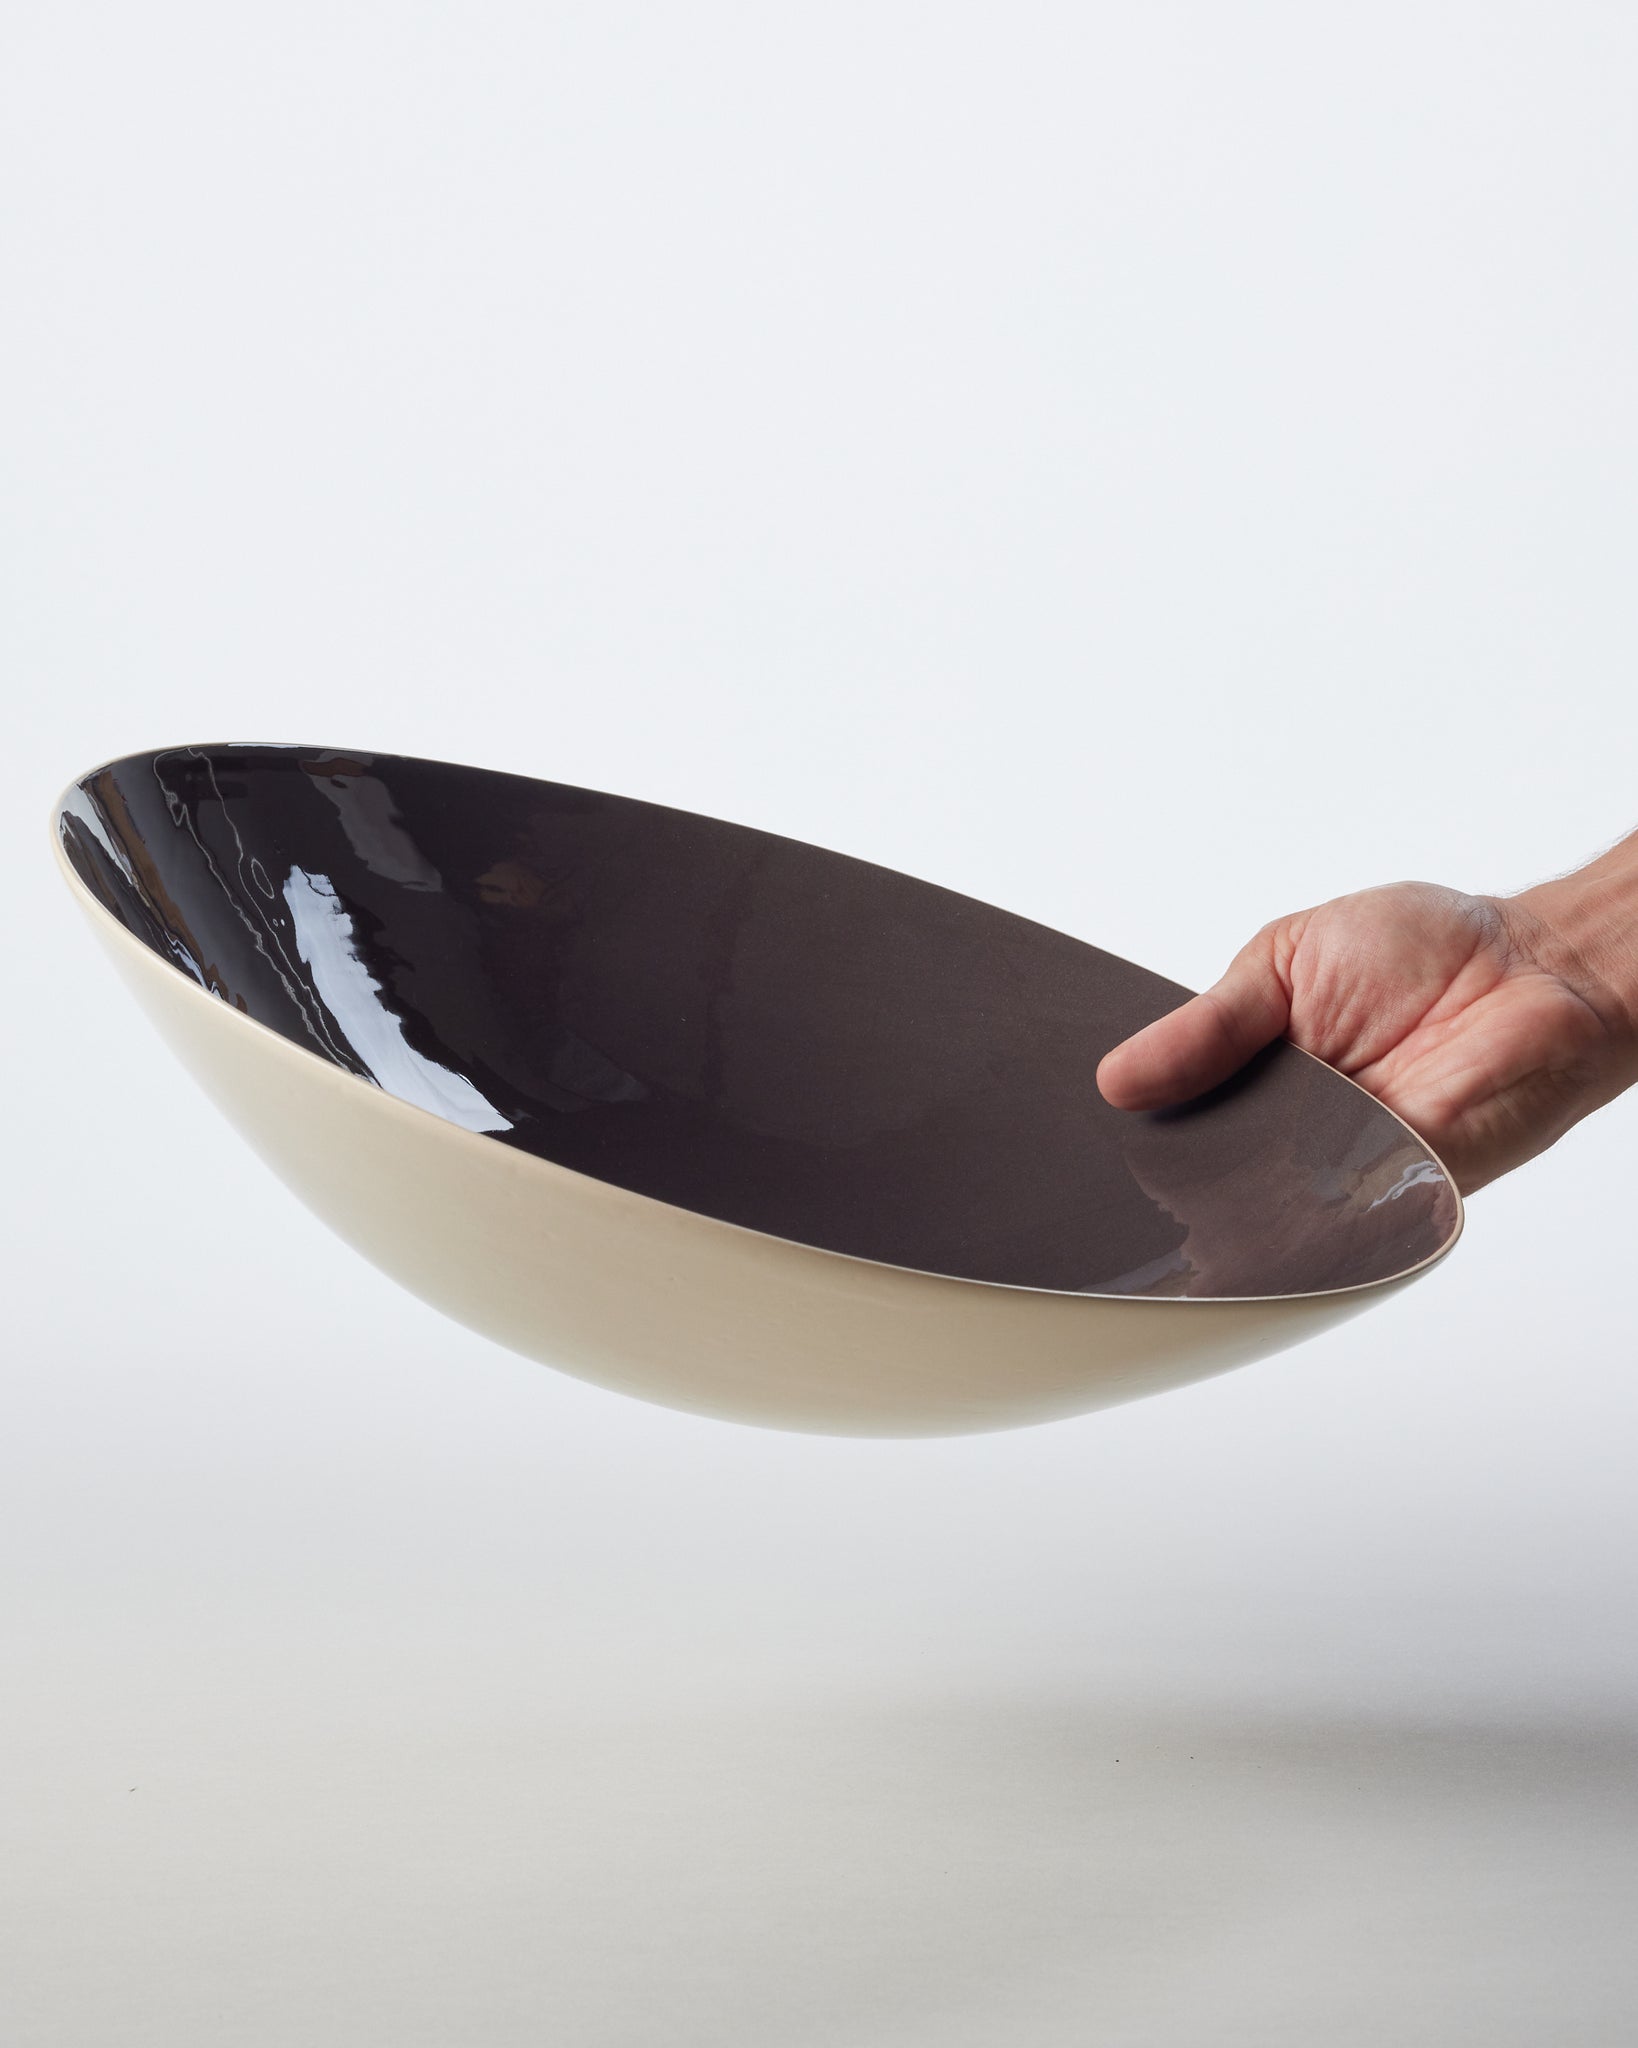 Large Serving Bowl in Cocoa